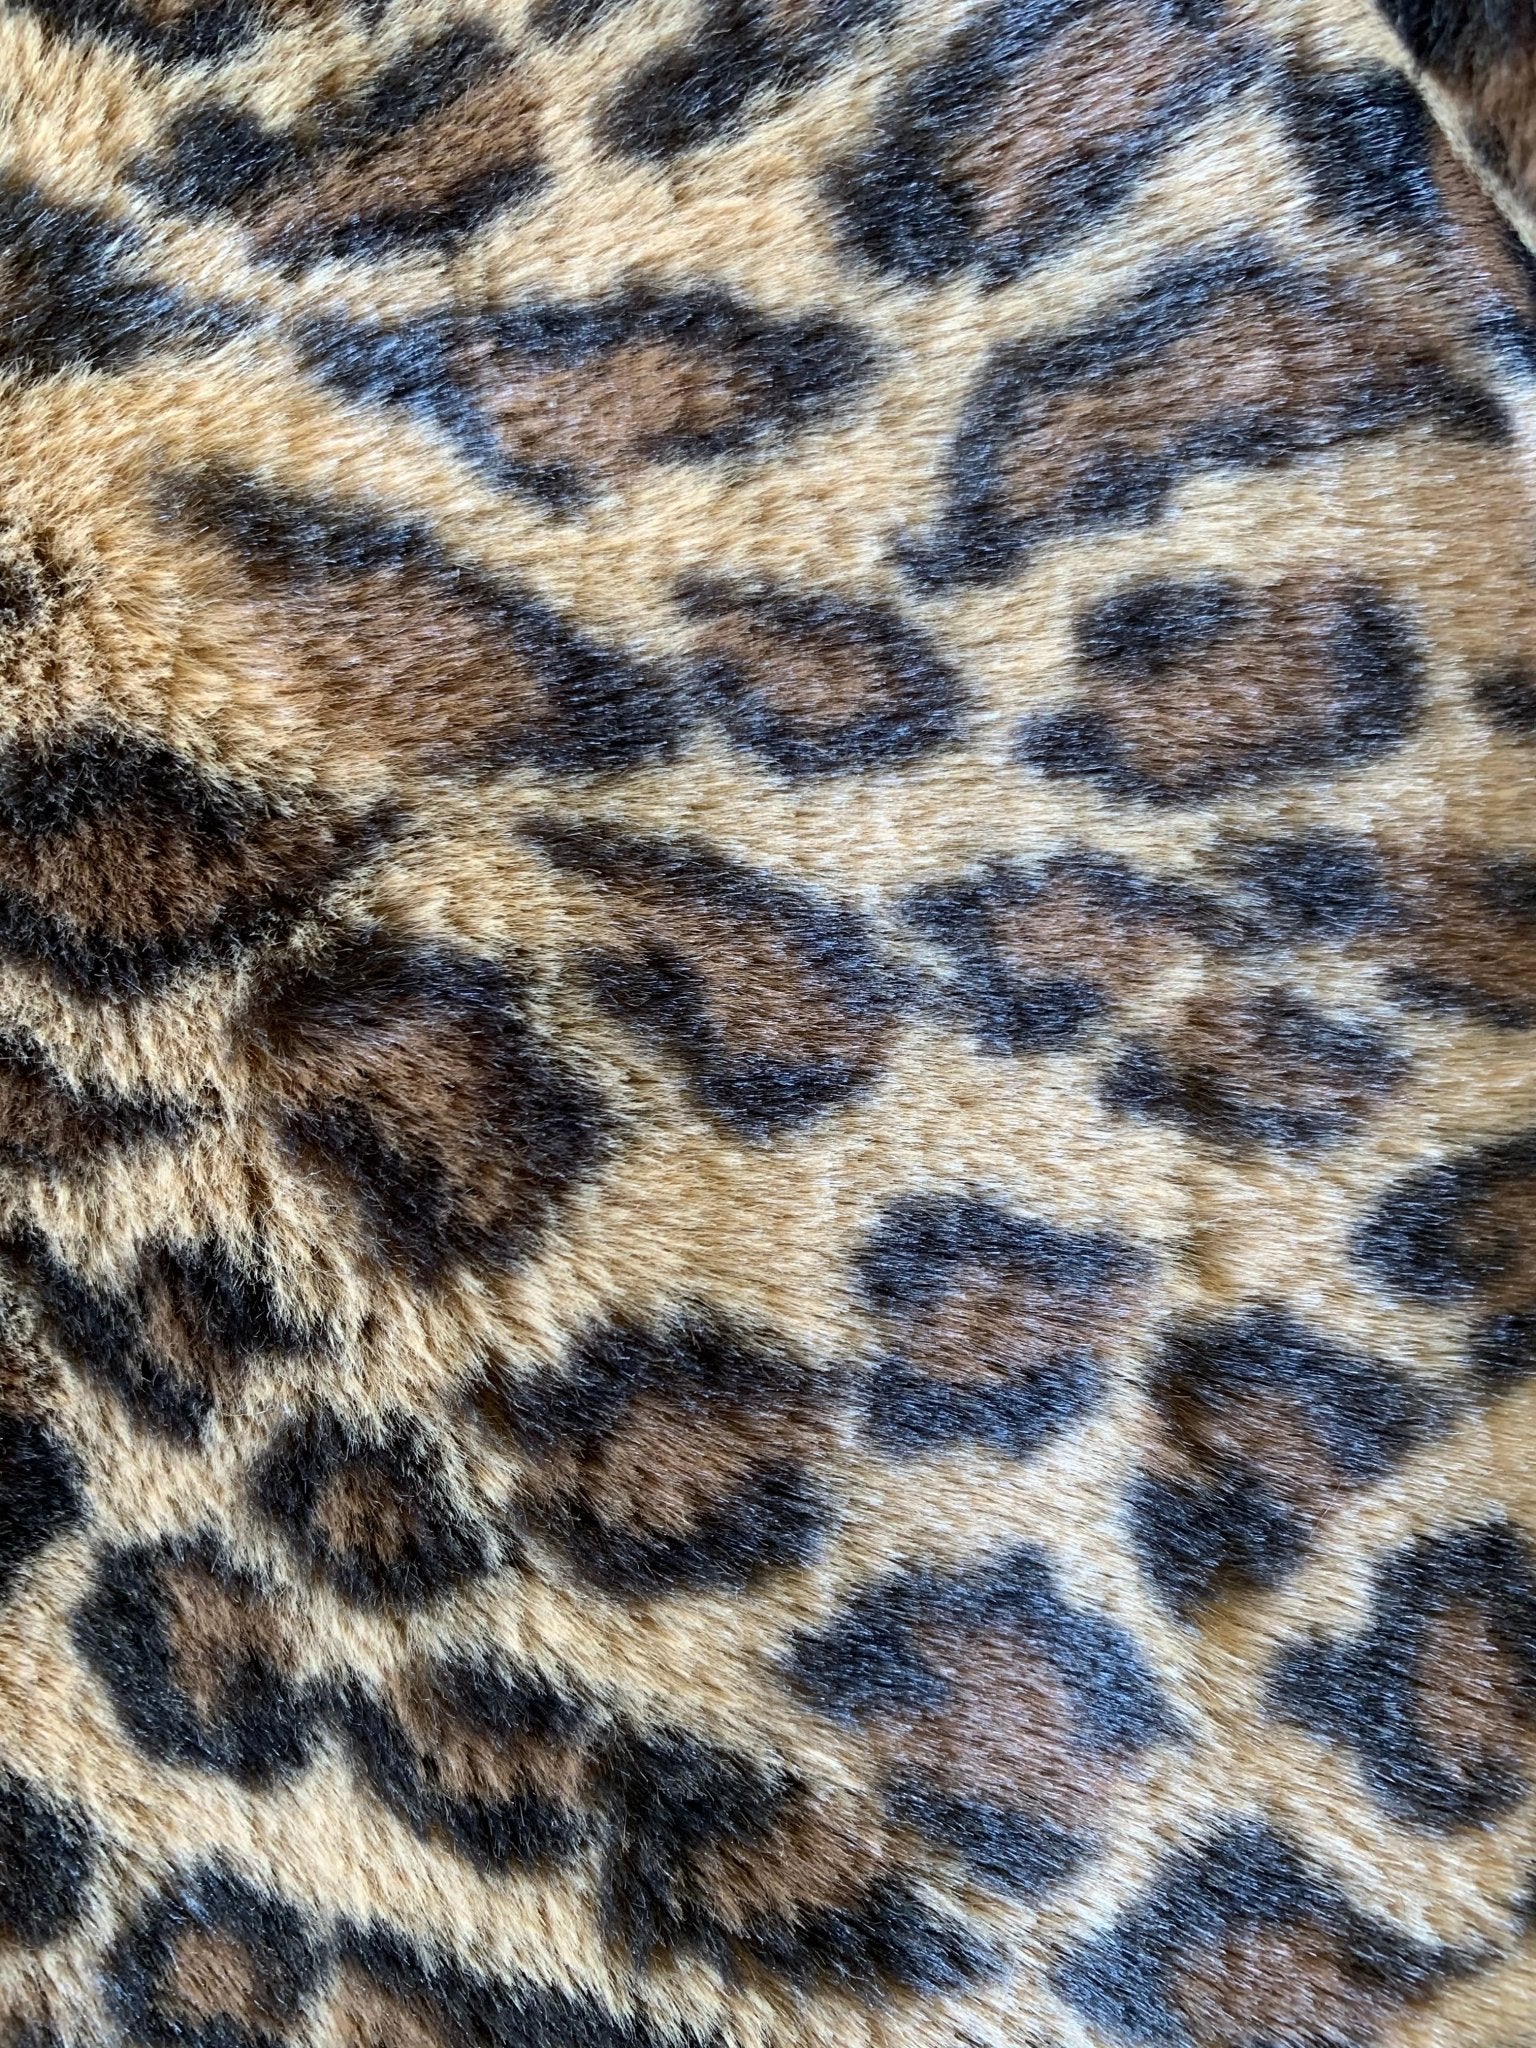 Leopard Faux Fur Fabric by the Yard or Meter | Black and Gold | Pompom Fur